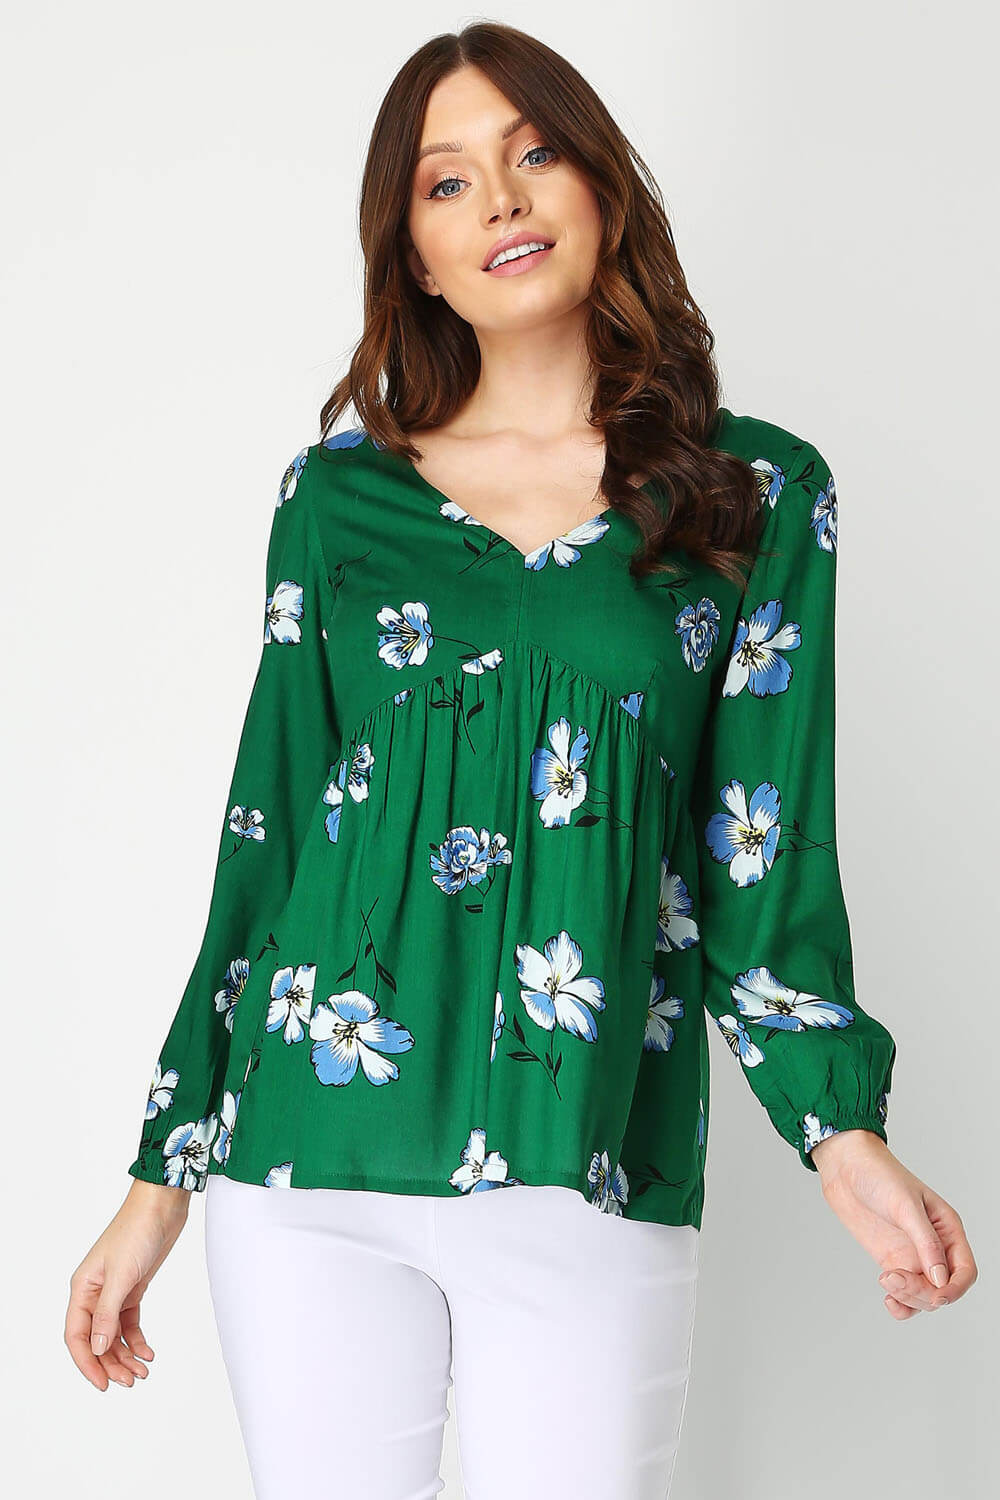 V-Neck Pleated Floral Top in Green - Roman Originals UK